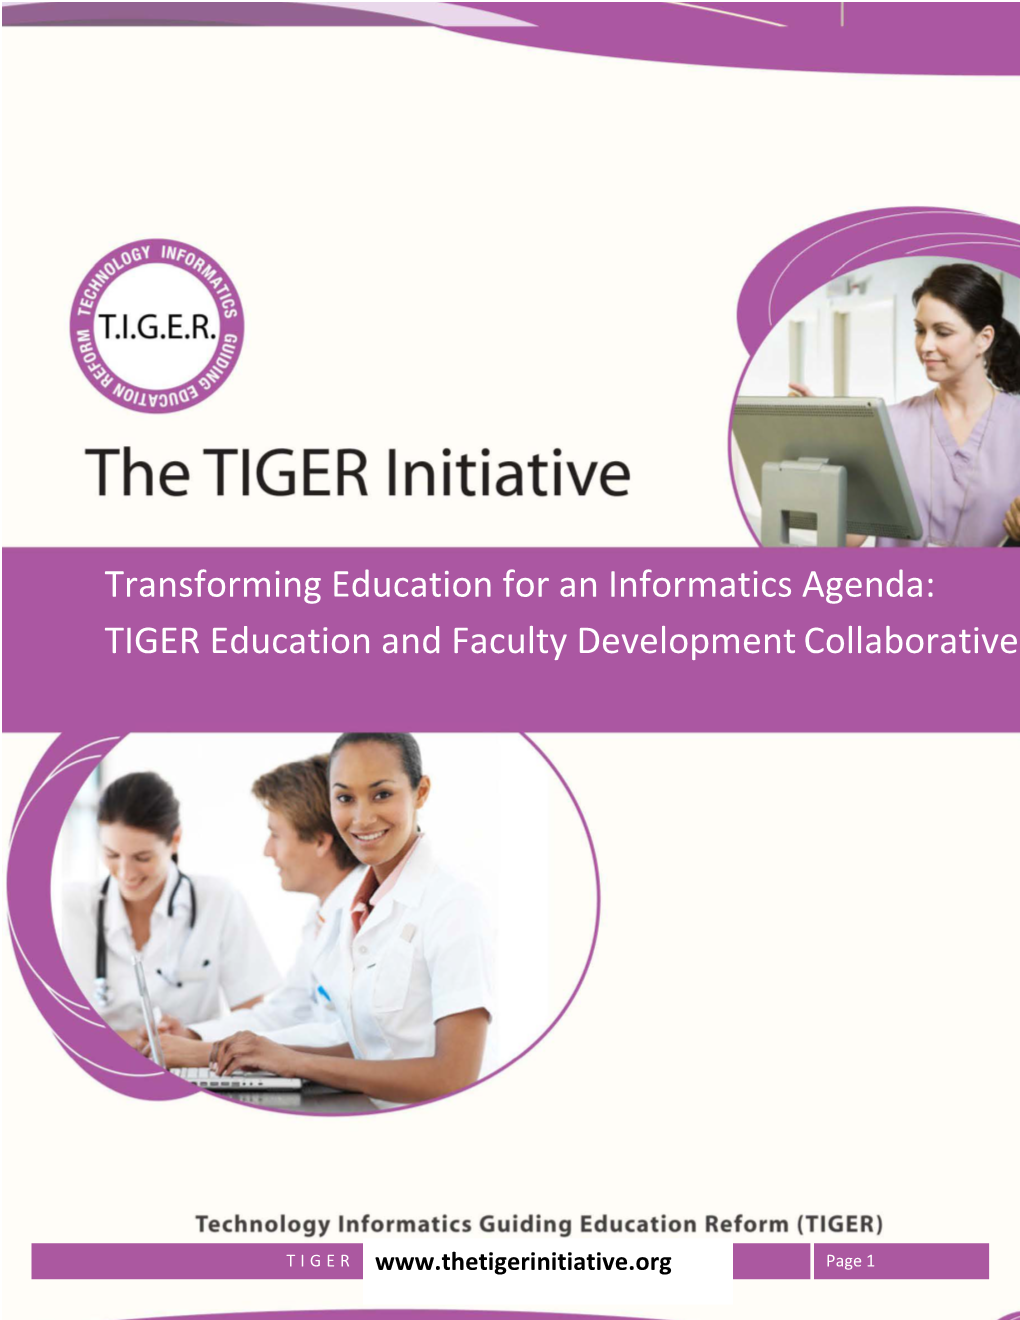 TIGER Education and Faculty Development Collaborative